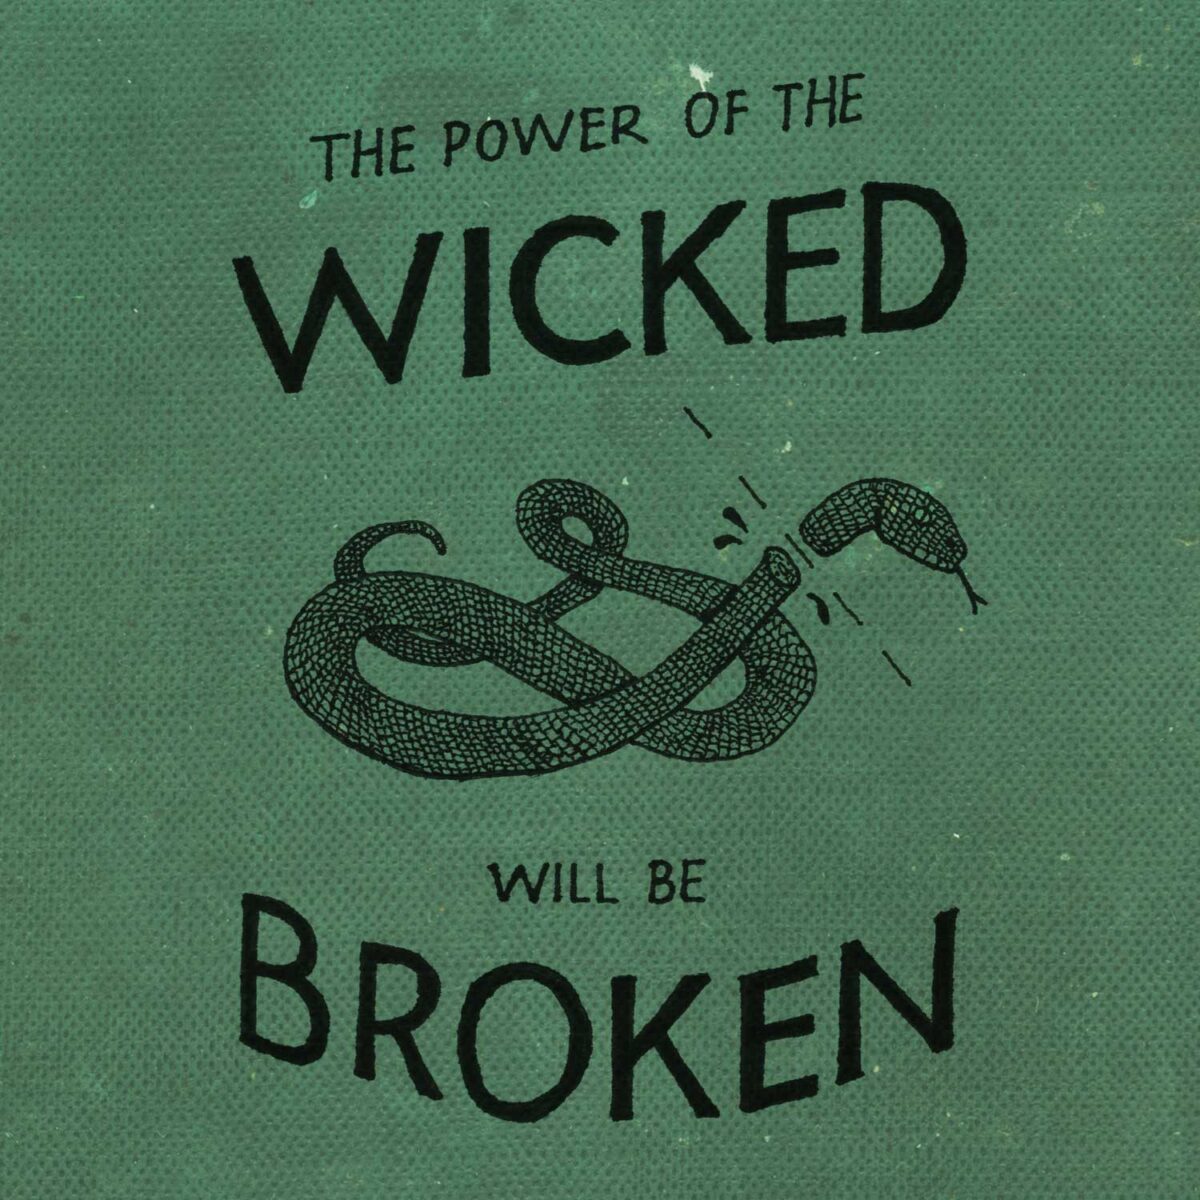 Hand lettering and illustration of a snake with it's head being chopped off from Psalm 37: The power of the wicked will be broken.